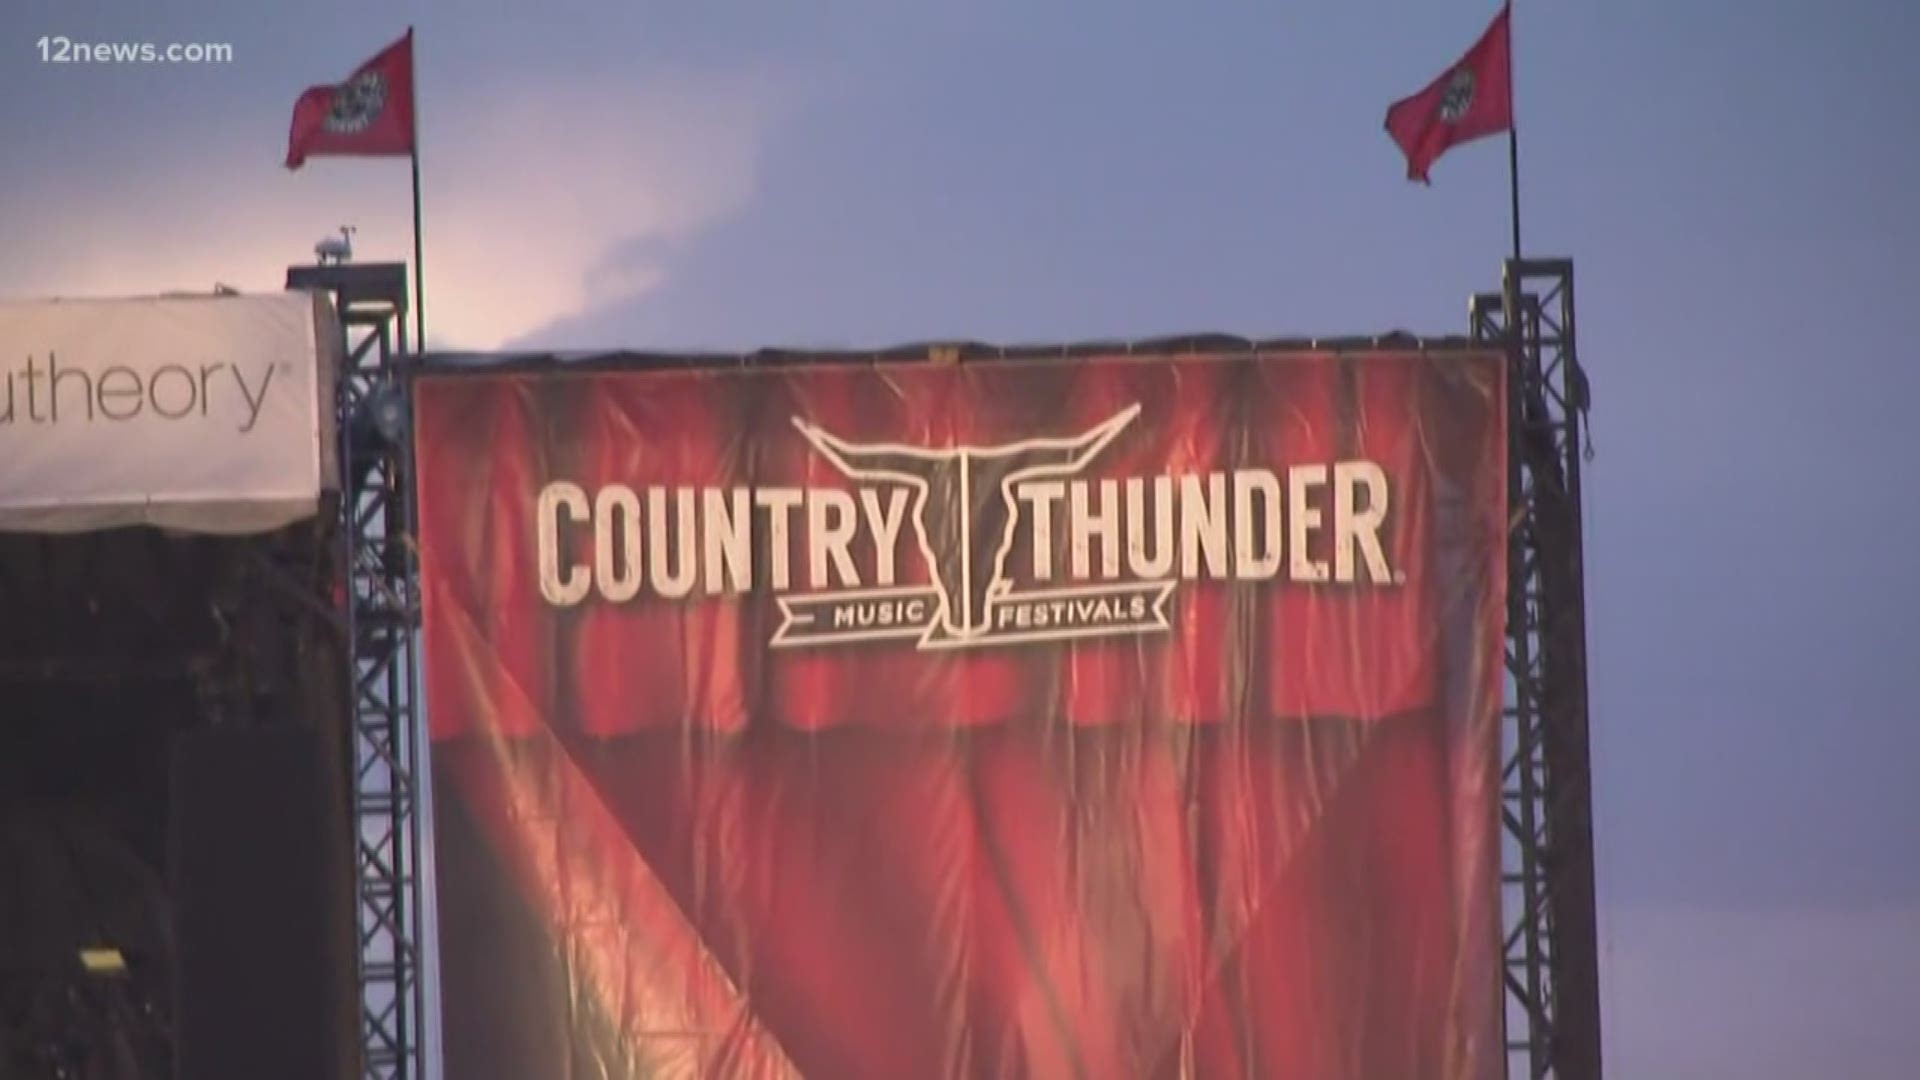 The lineup for the 2020 Country Thunder Music Festival has been released, and it's a big one. Headliners include: Dustin Lynch, Luke Combs and Kane Brown.